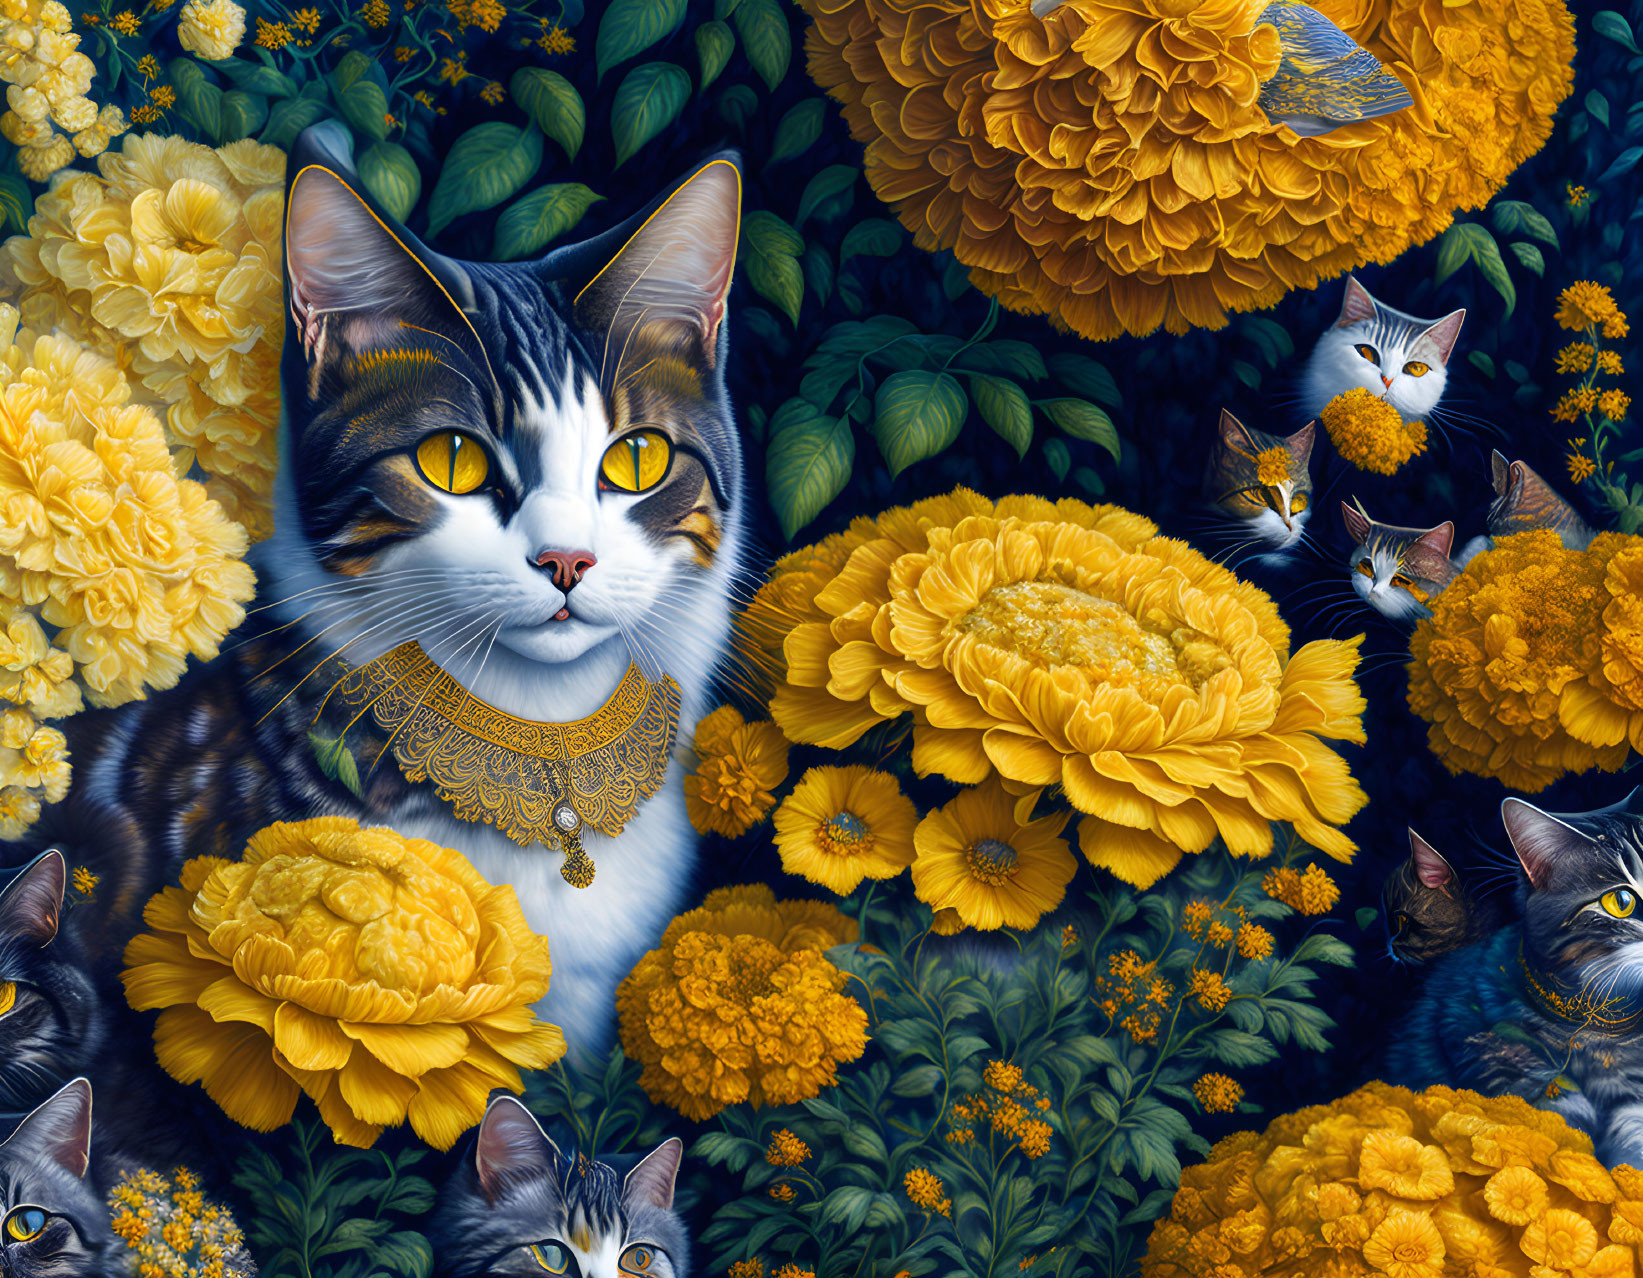 Detailed artwork of tuxedo cat with yellow eyes in floral setting.